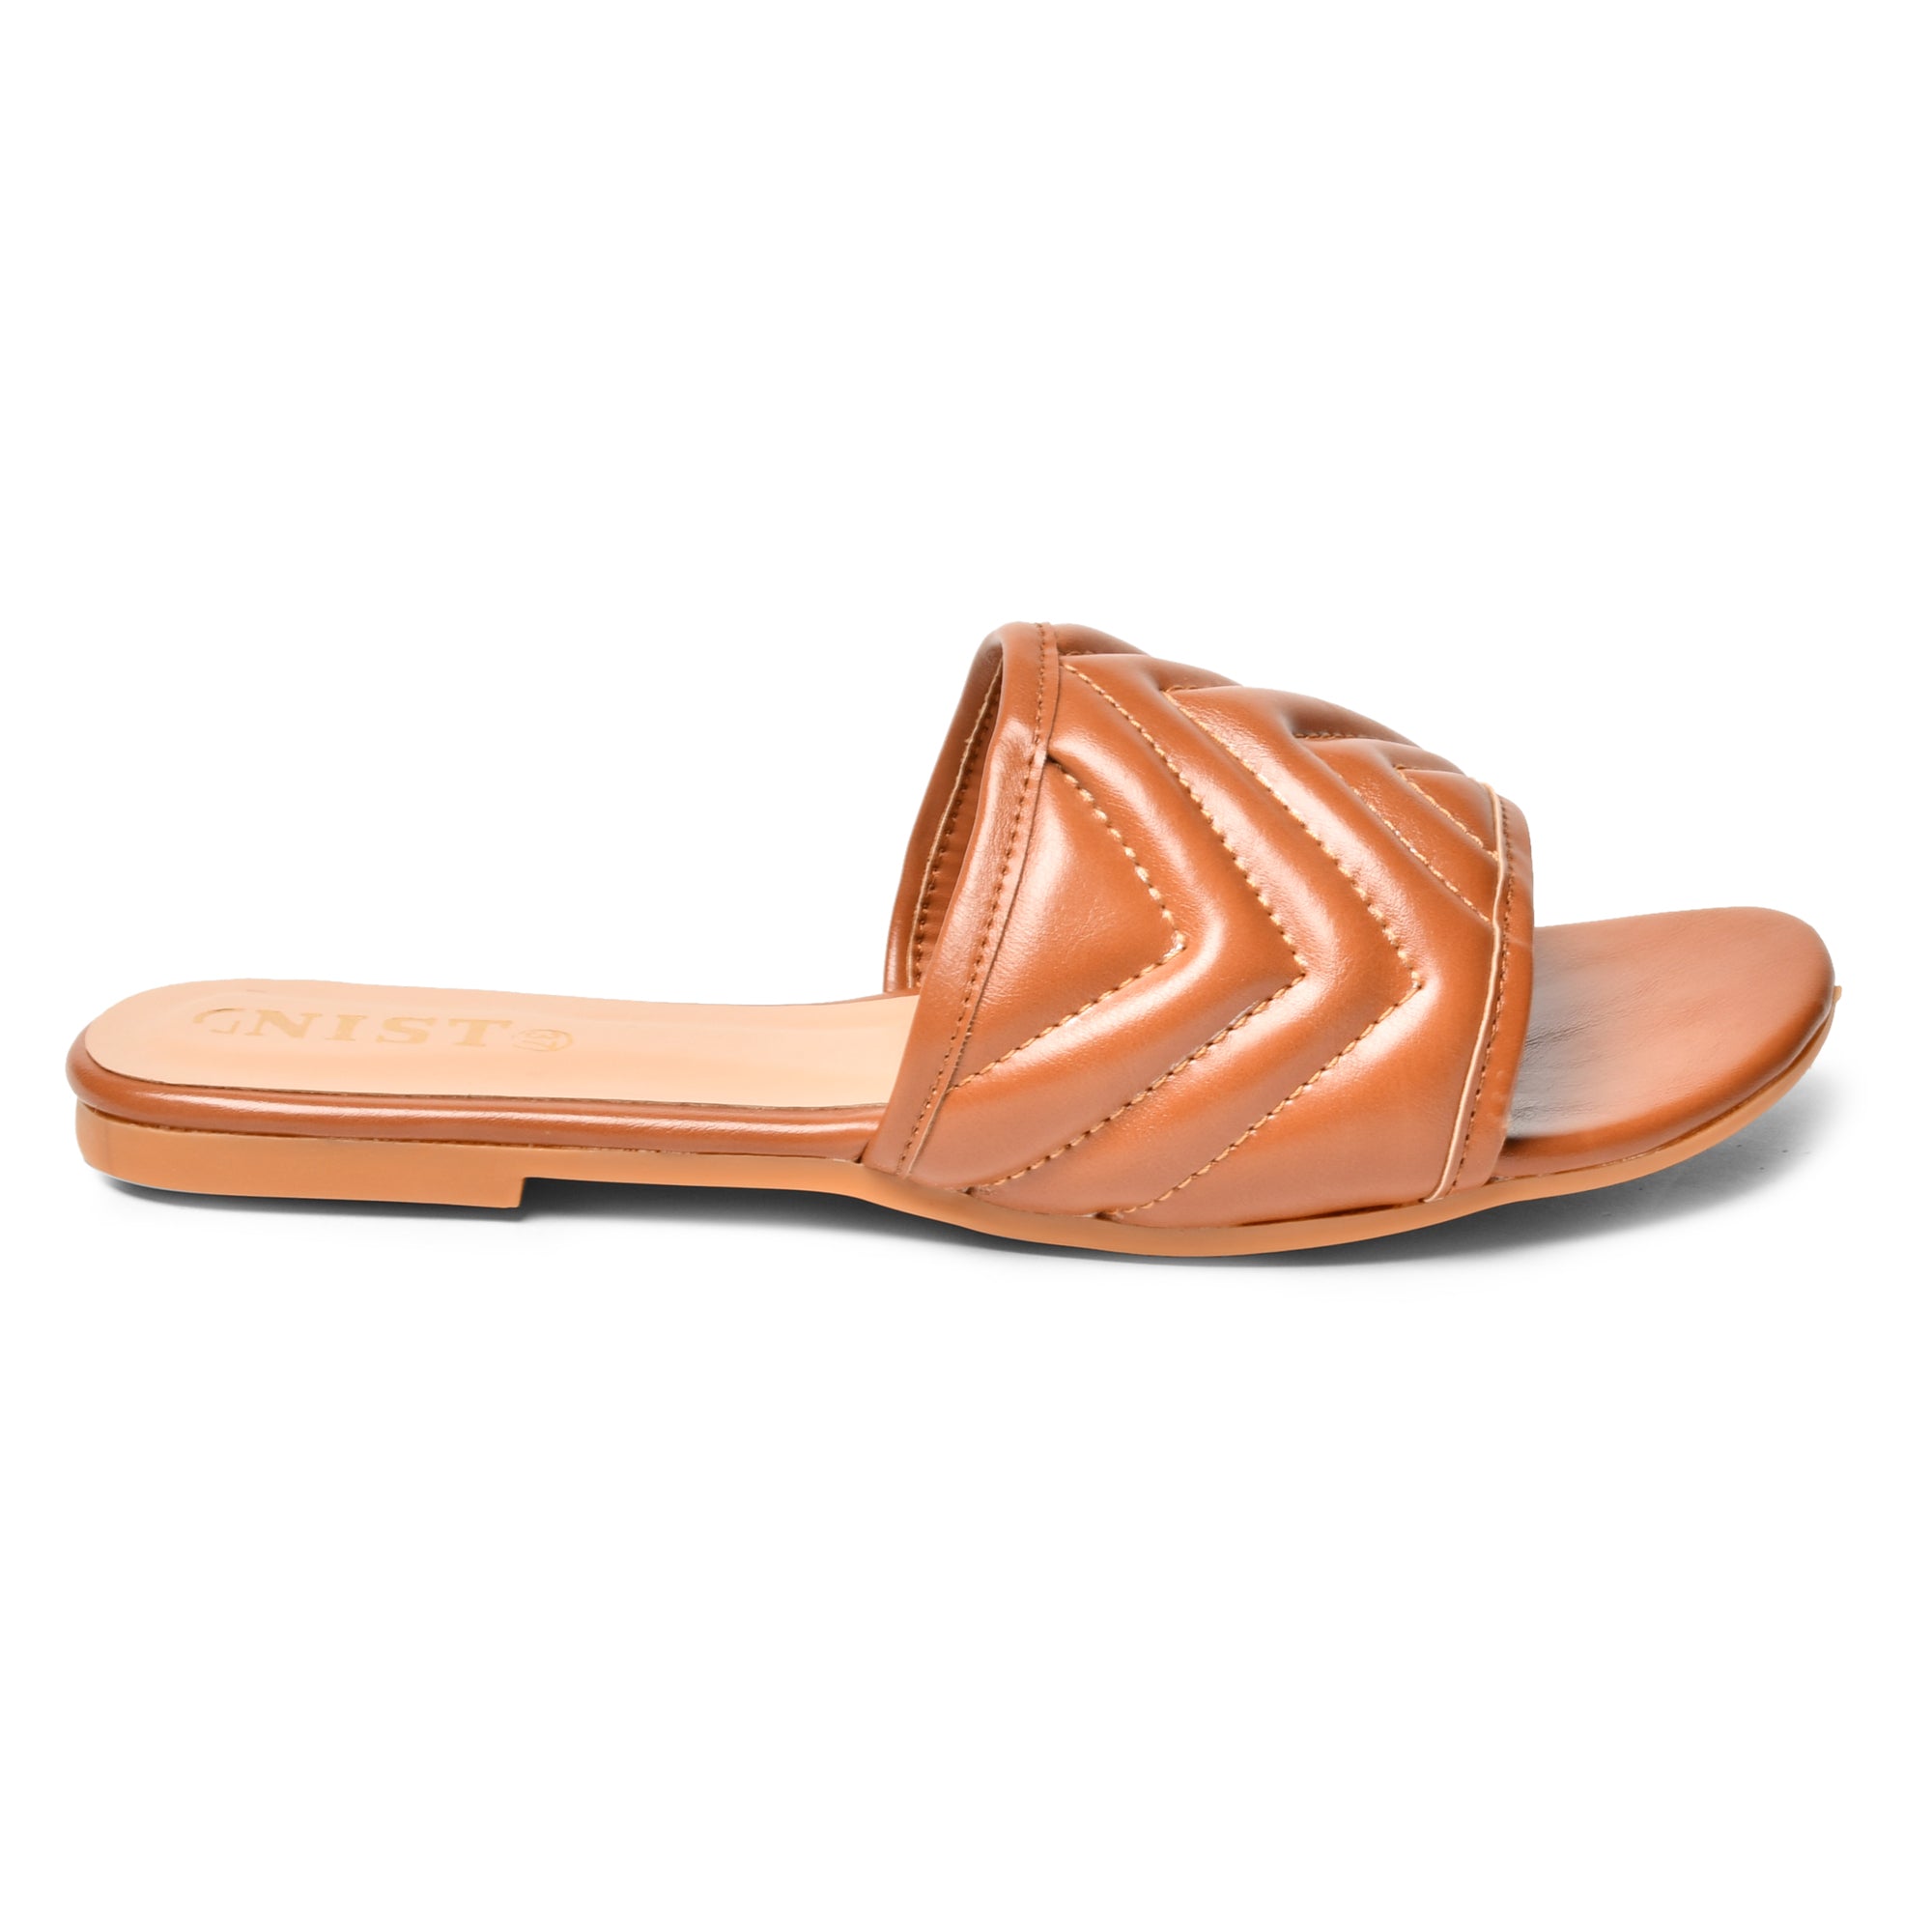 GNIST Ziczak GG Quilted Faux Leather Tan Flats